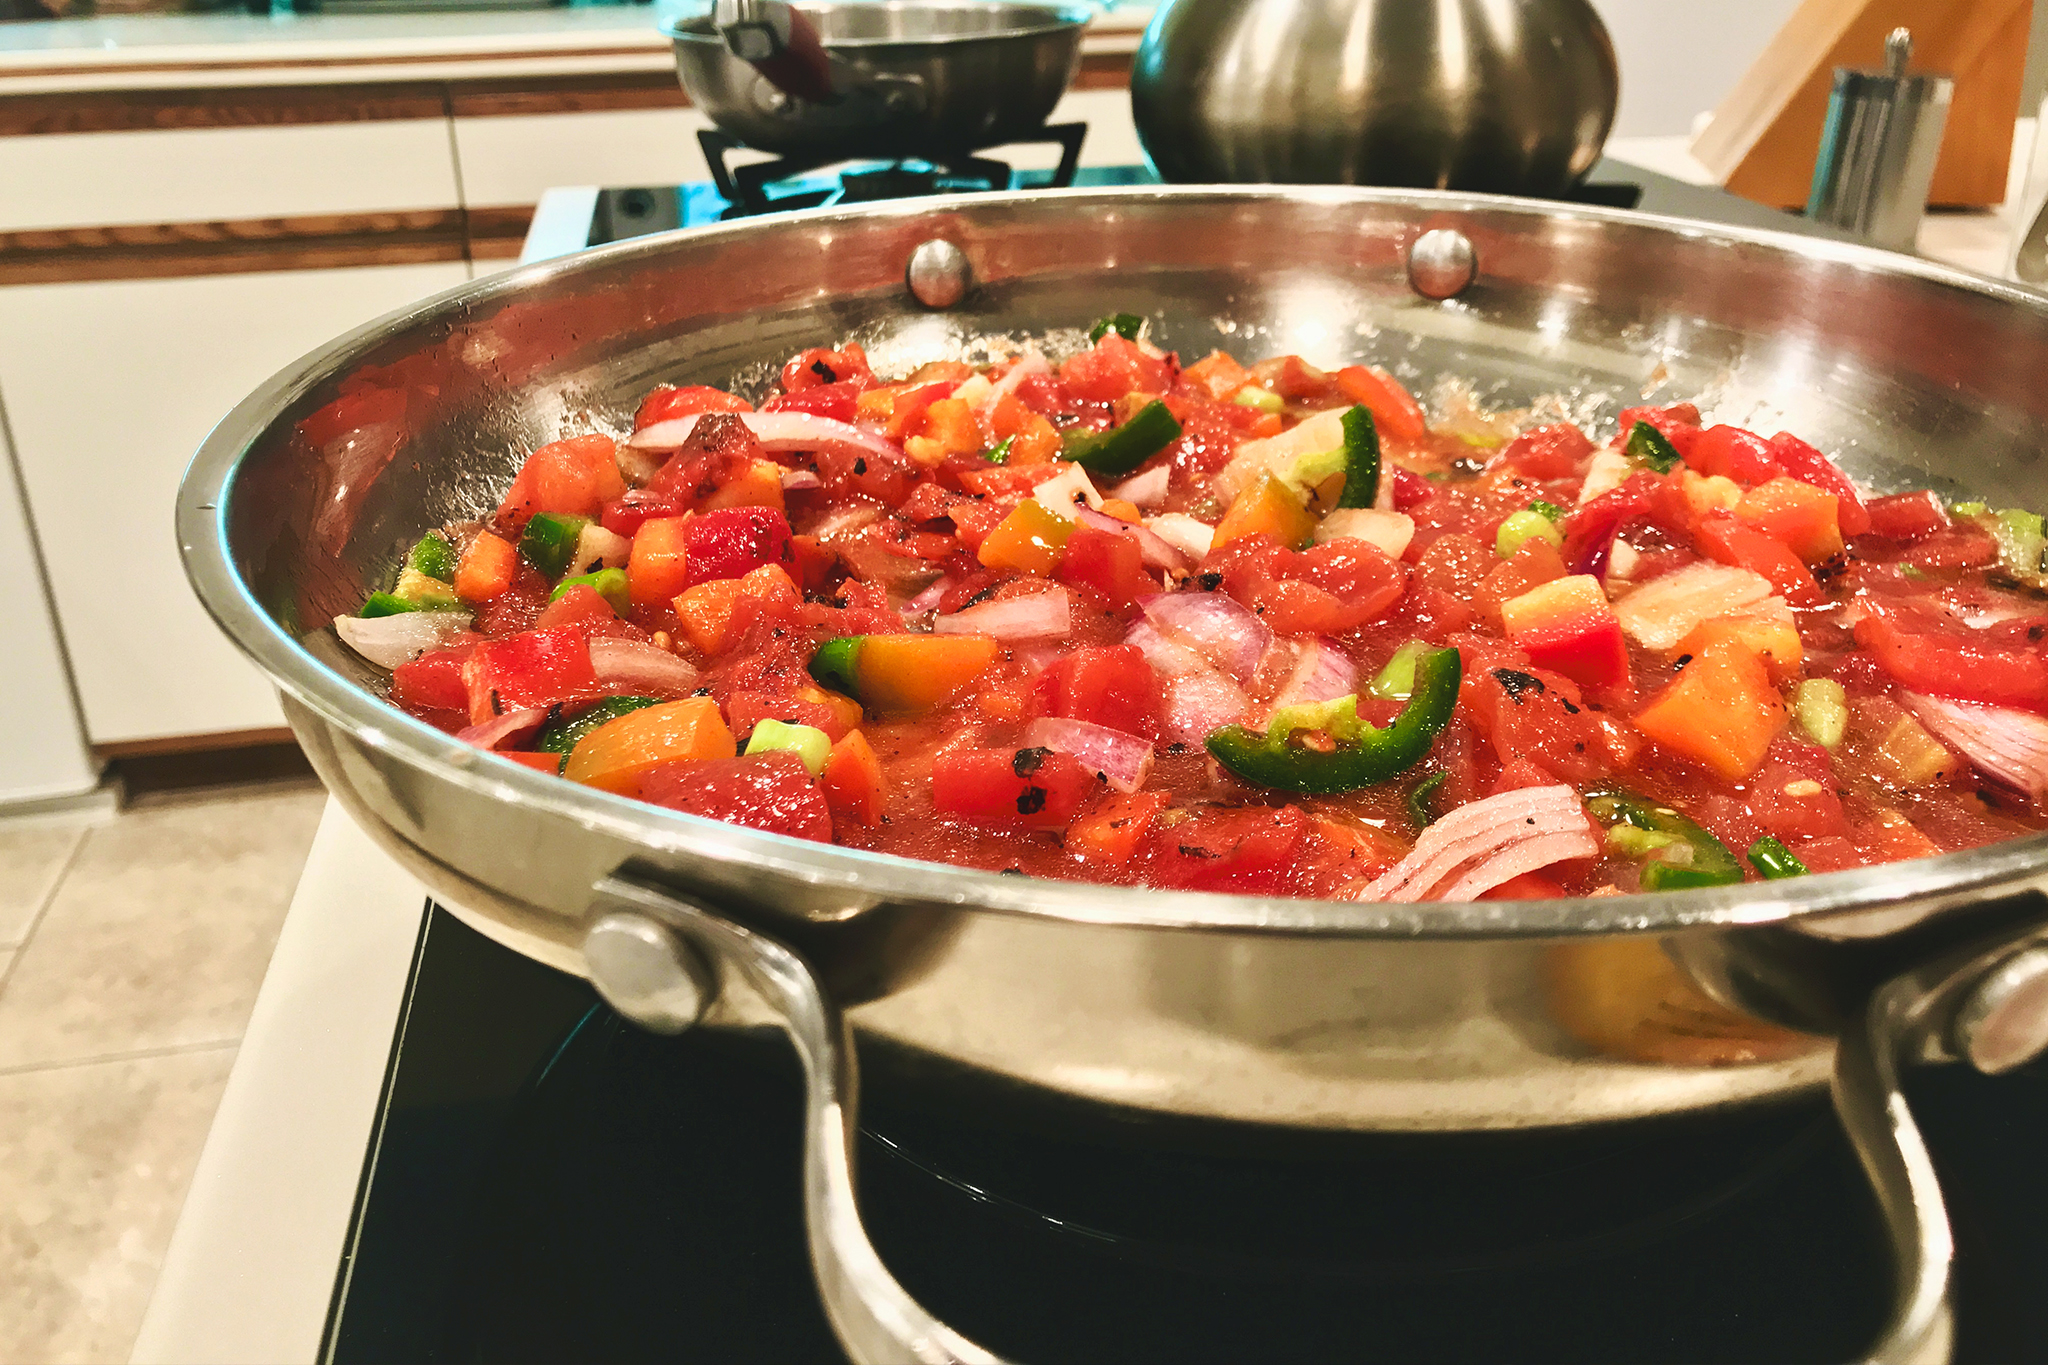 Stainless steel cookware: what you need to know